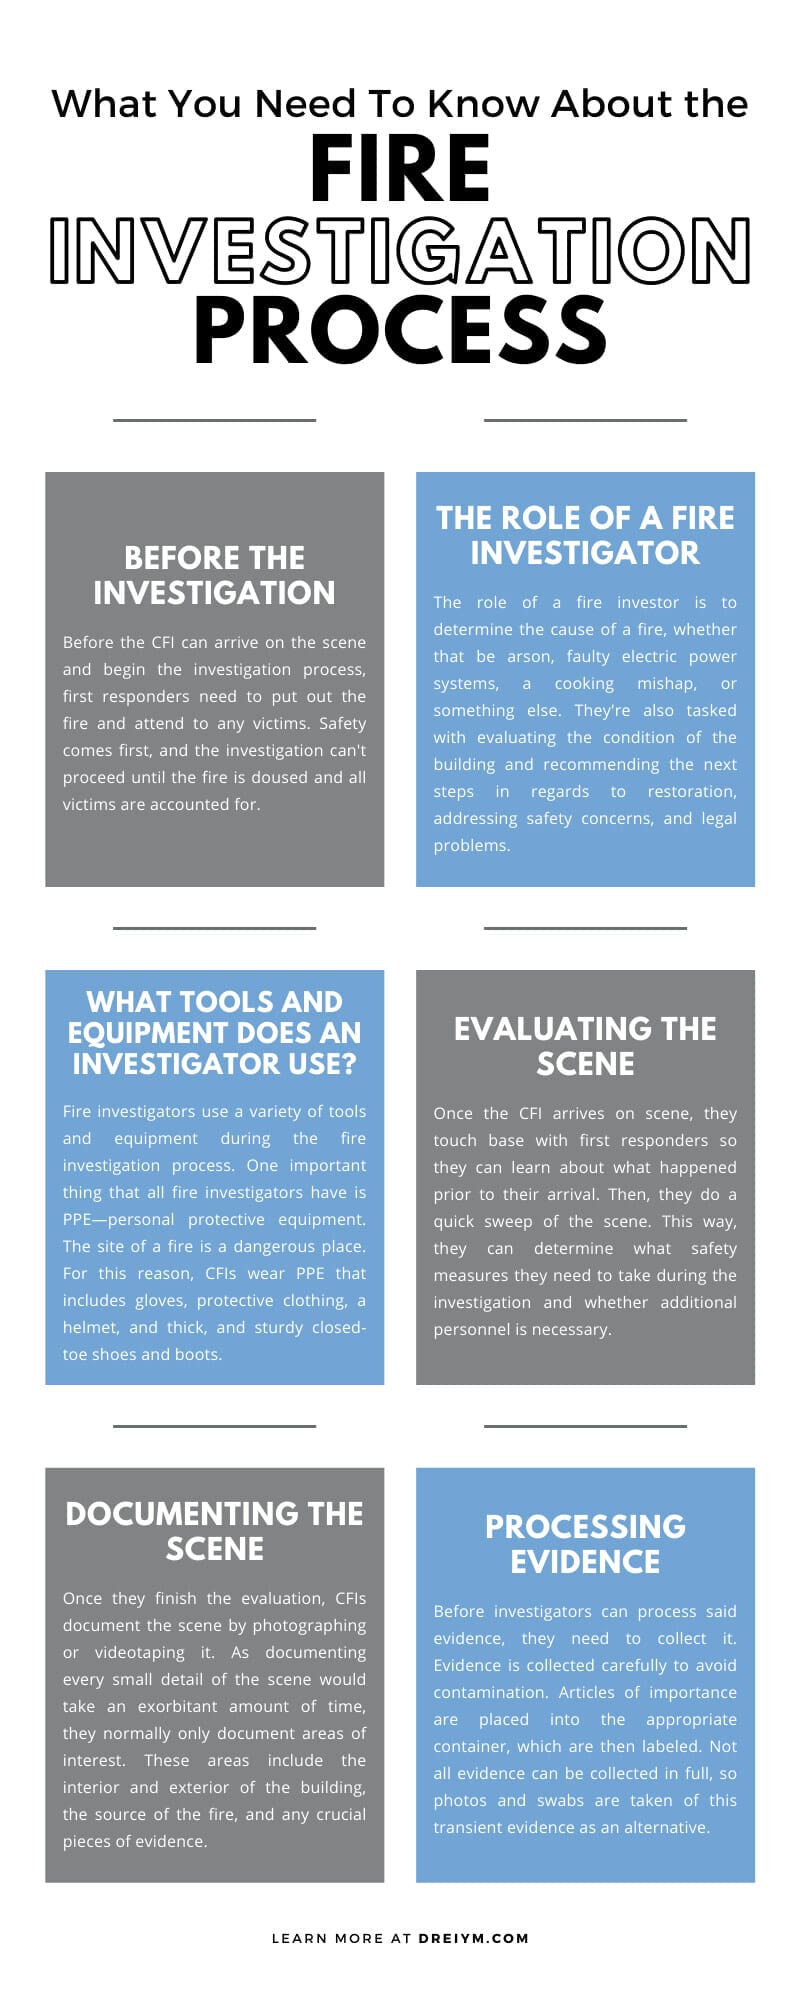 What You Need To Know About the Fire Investigation Process